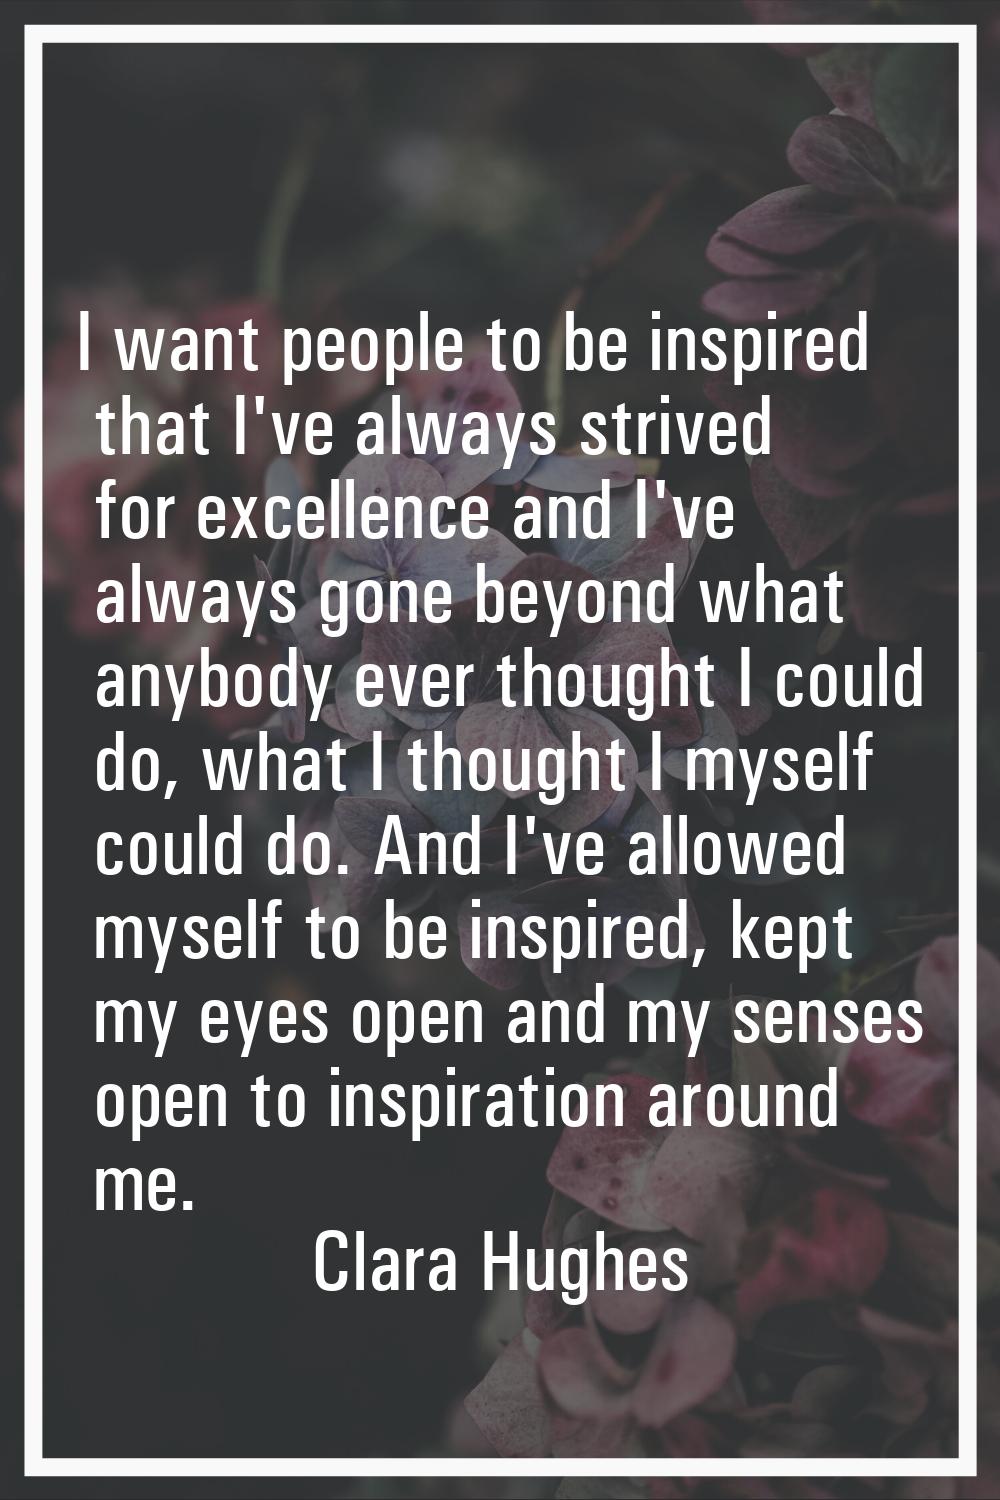 I want people to be inspired that I've always strived for excellence and I've always gone beyond wh